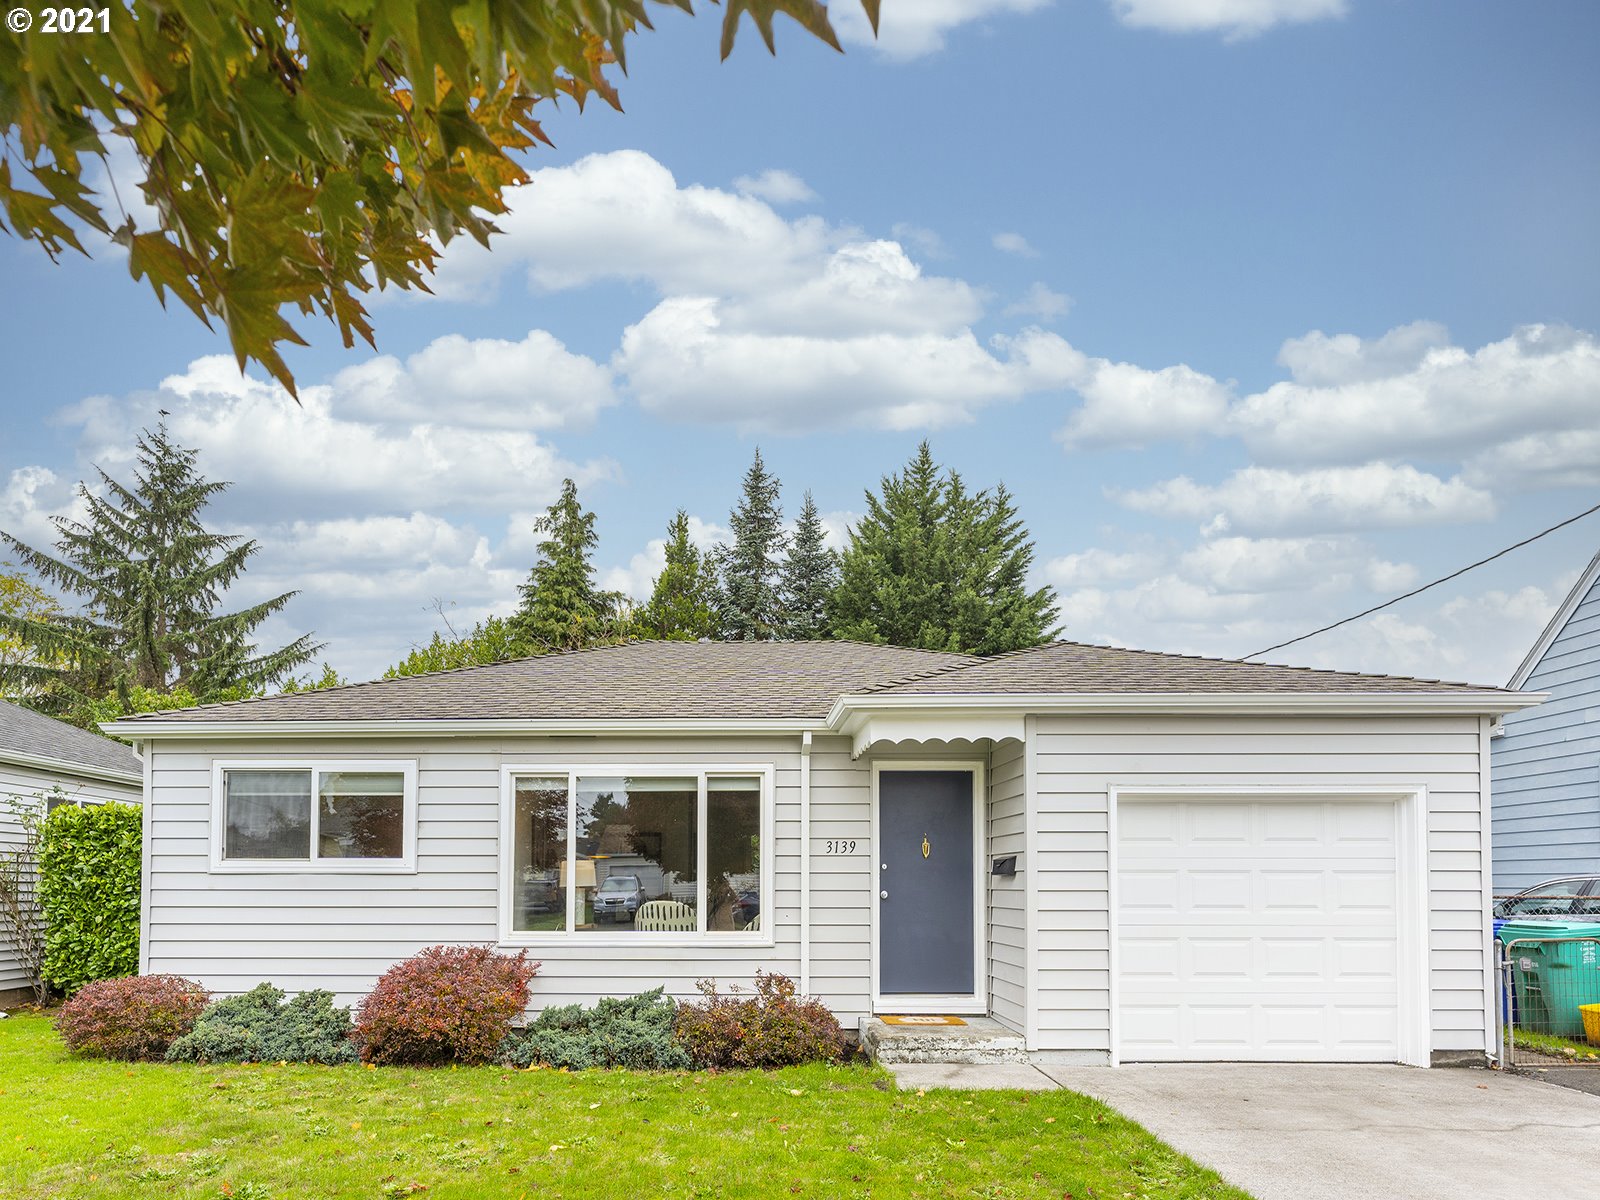 3139 SE 64TH AVE (1 of 27)